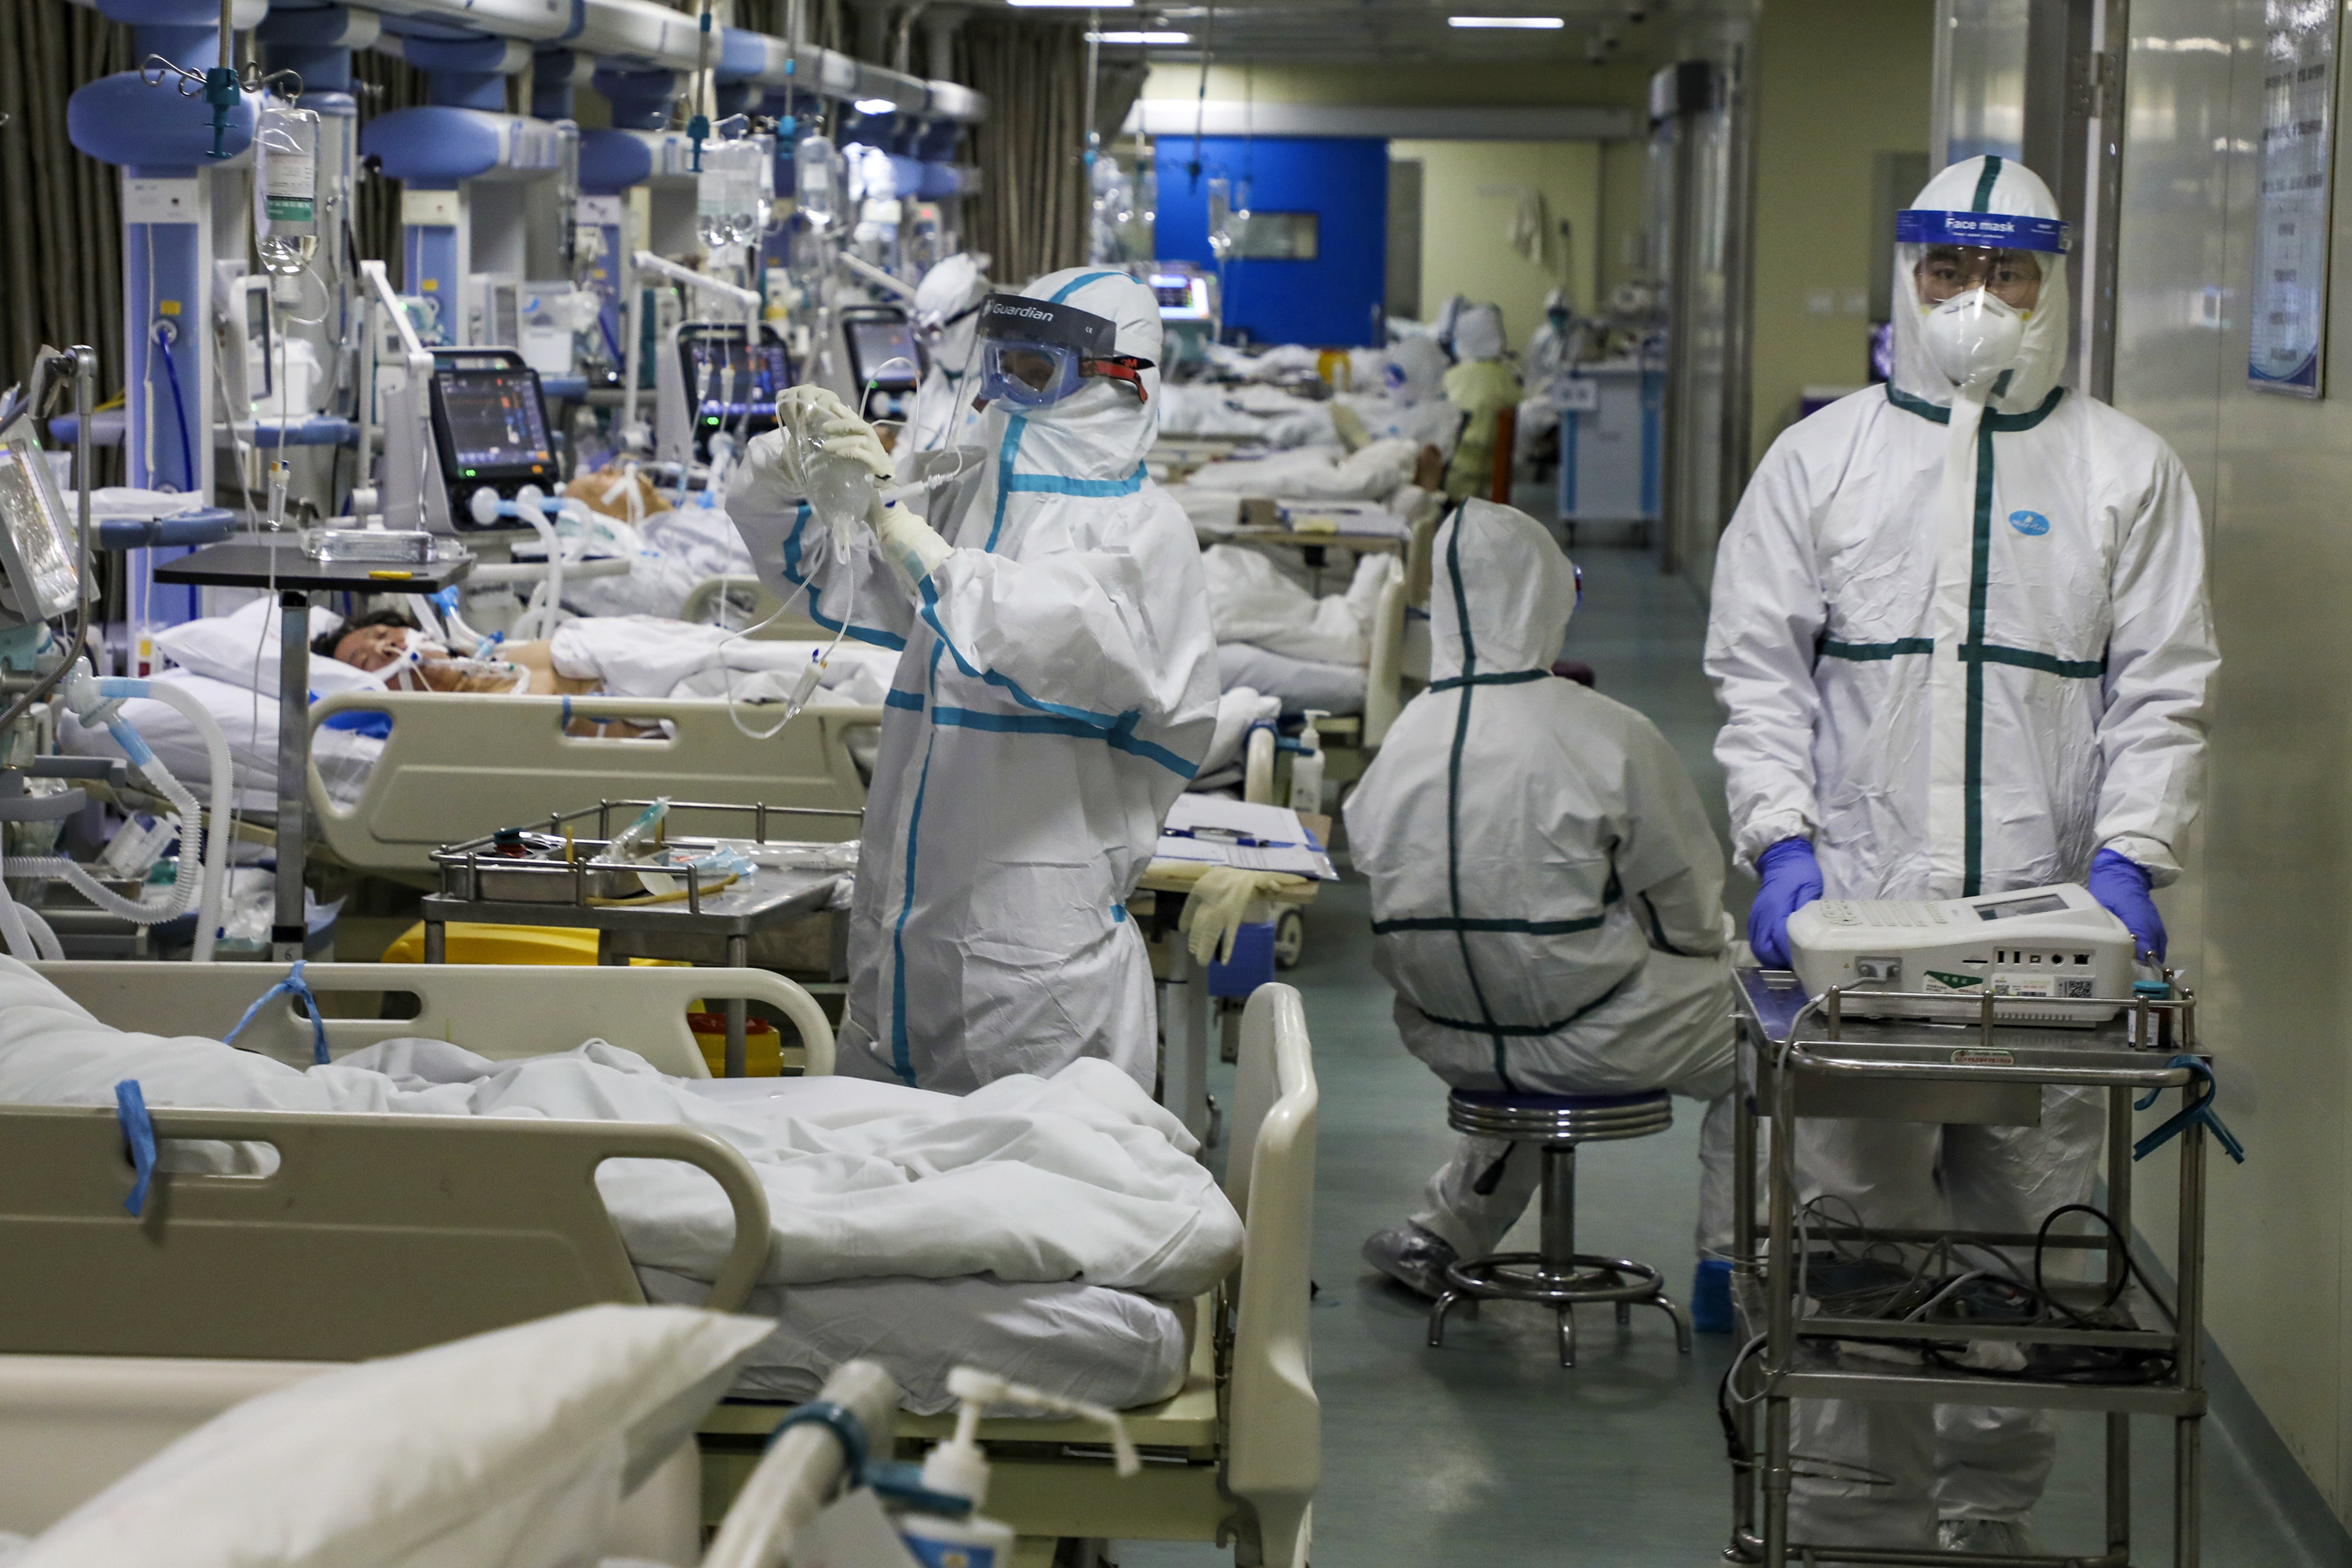 Medical workers treat patients in an isolated intensive care unit at a hospital in Wuhan. Photo: Chinatopix via AP